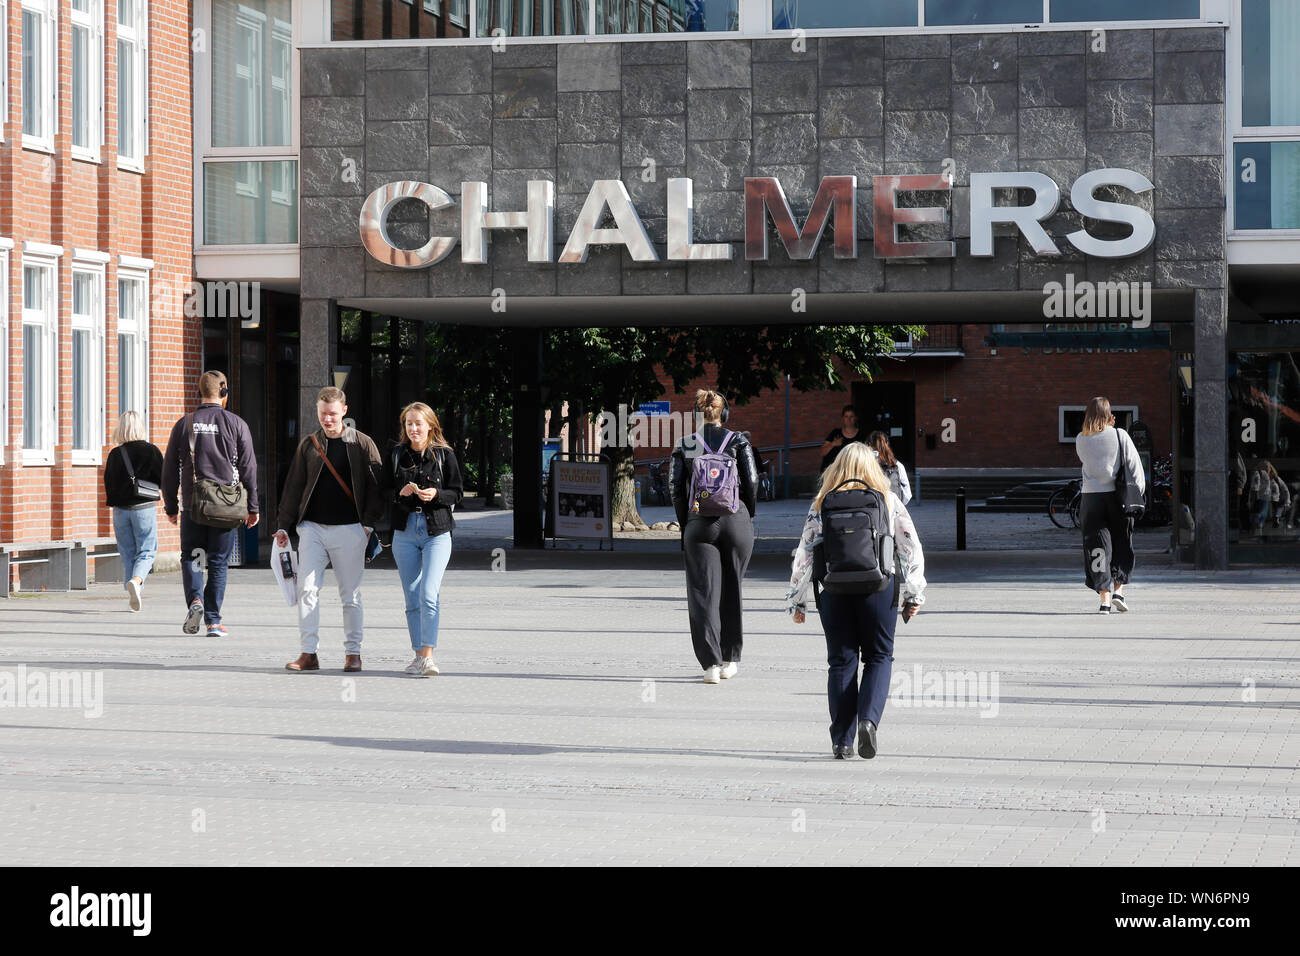 Gothenburg, Sweden - September 2, 2019: The gate to the Chalmers University of Technology. Stock Photo